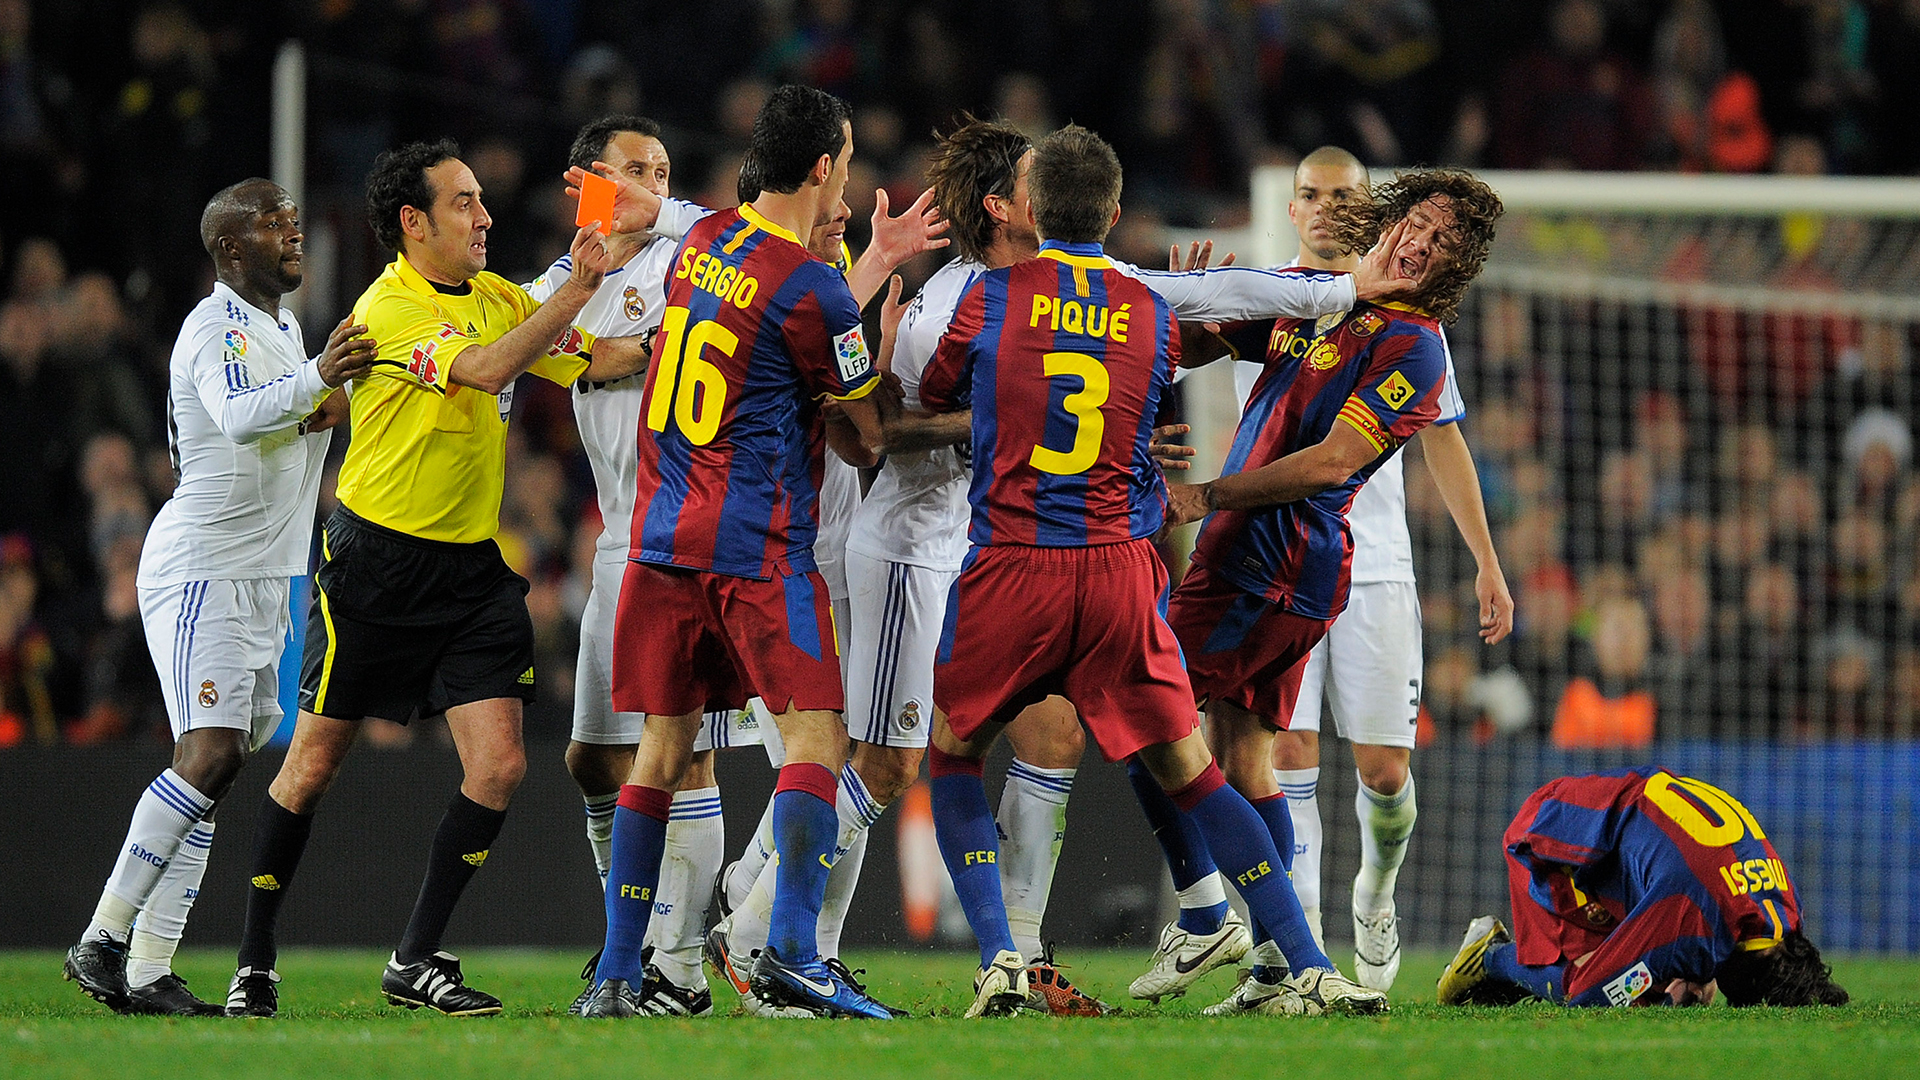 Barcelona v Real Madrid: A look at five of the best El Clasico matches